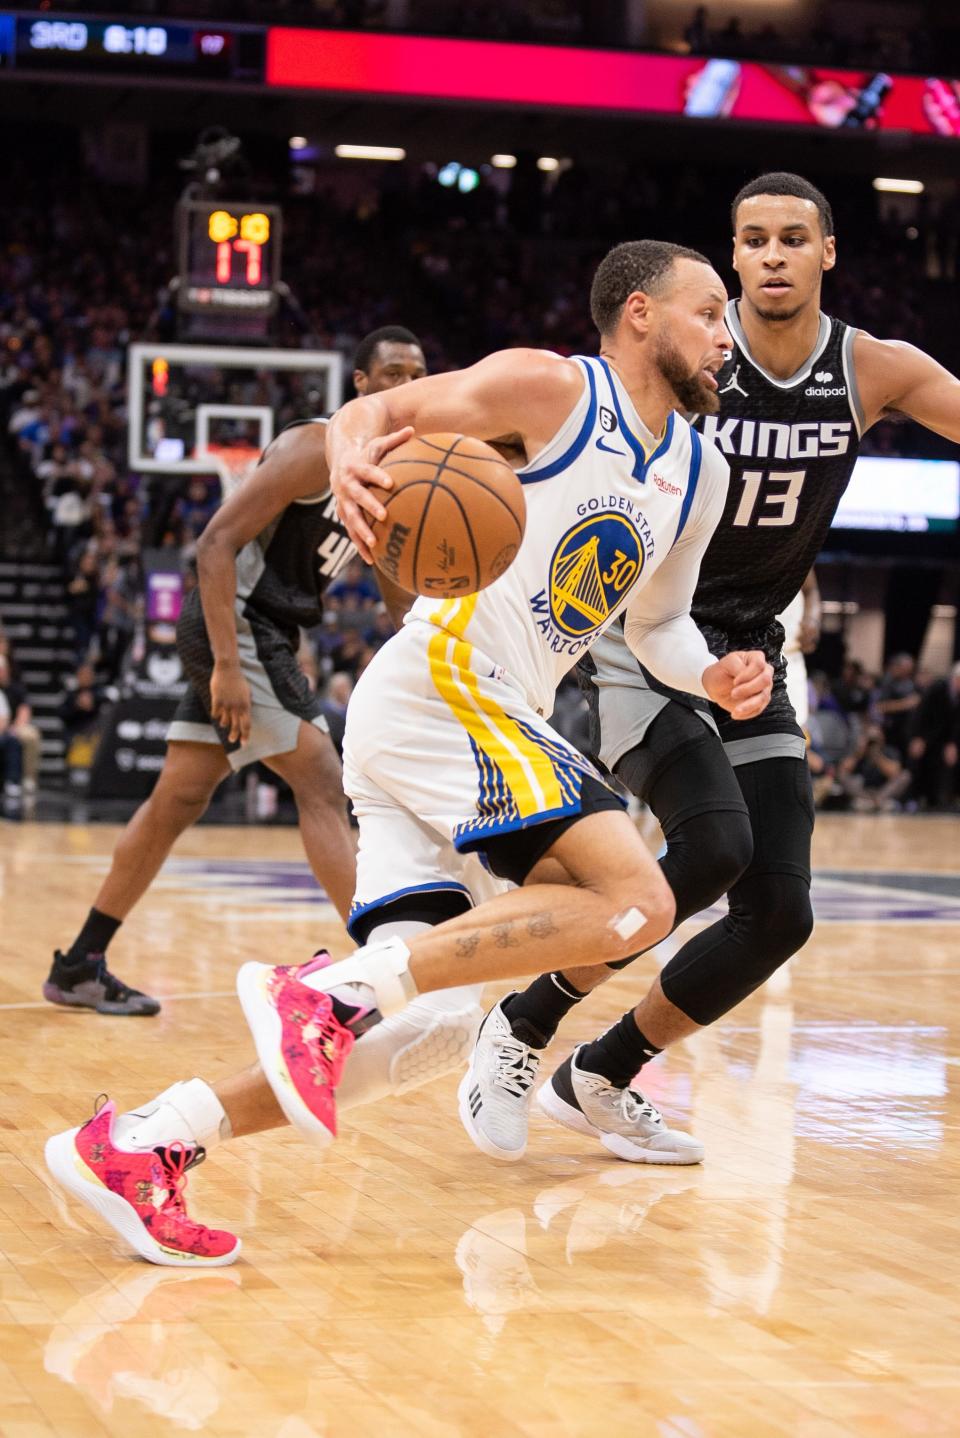 Will Steph Curry and the Golden State Warriors beat the Sacramento Kings in the first round of the NBA Playoffs? NBA picks and predictions weigh in on the series.